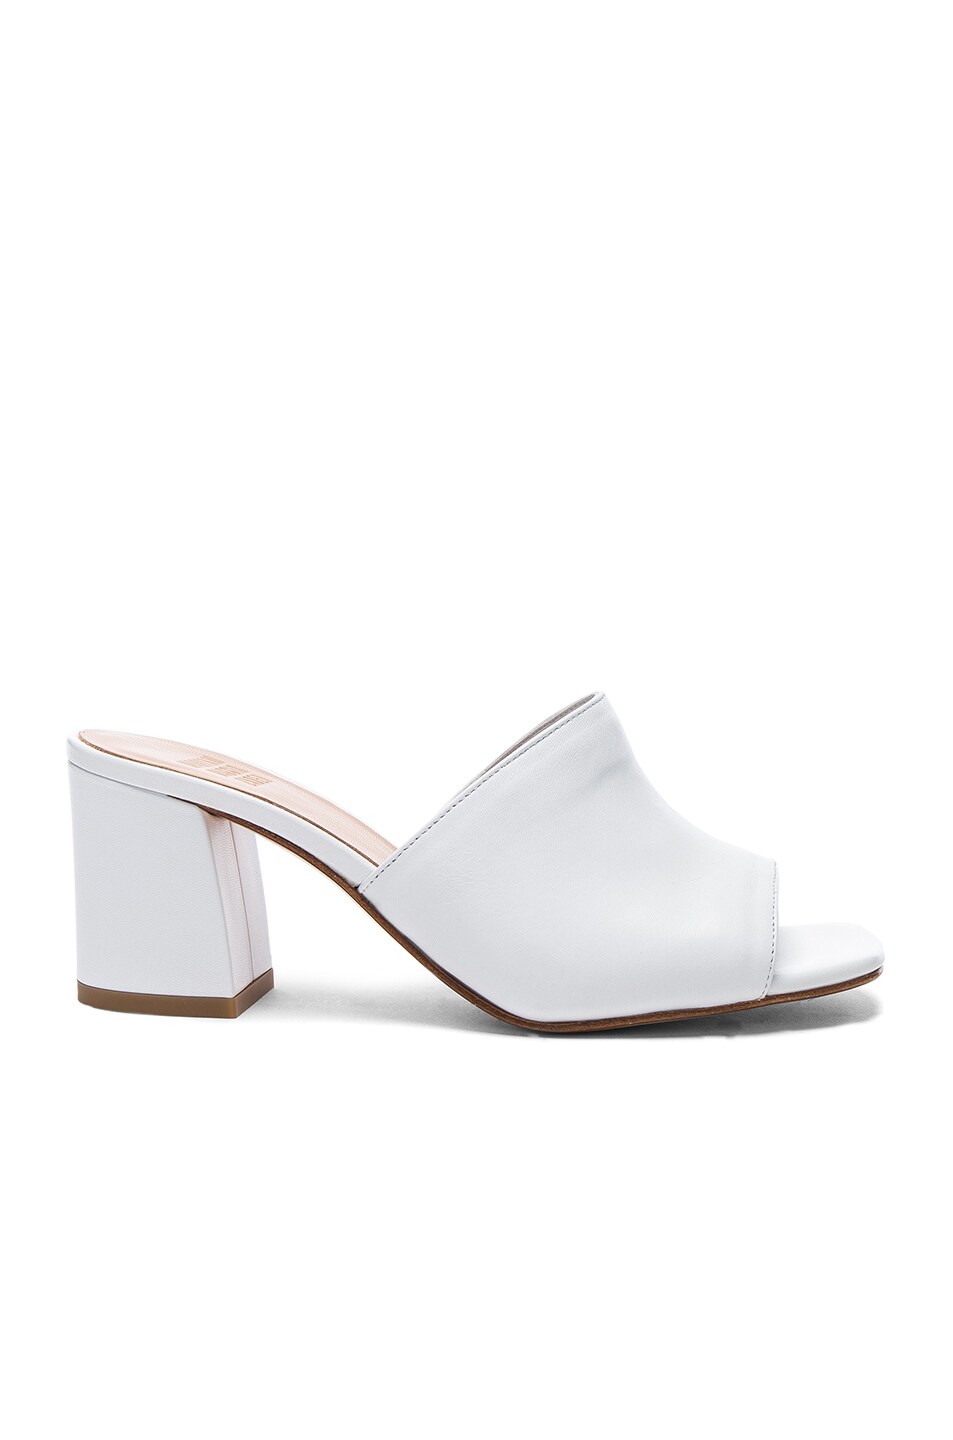 Image 1 of Maryam Nassir Zadeh Leather Mar Mules in White Calf